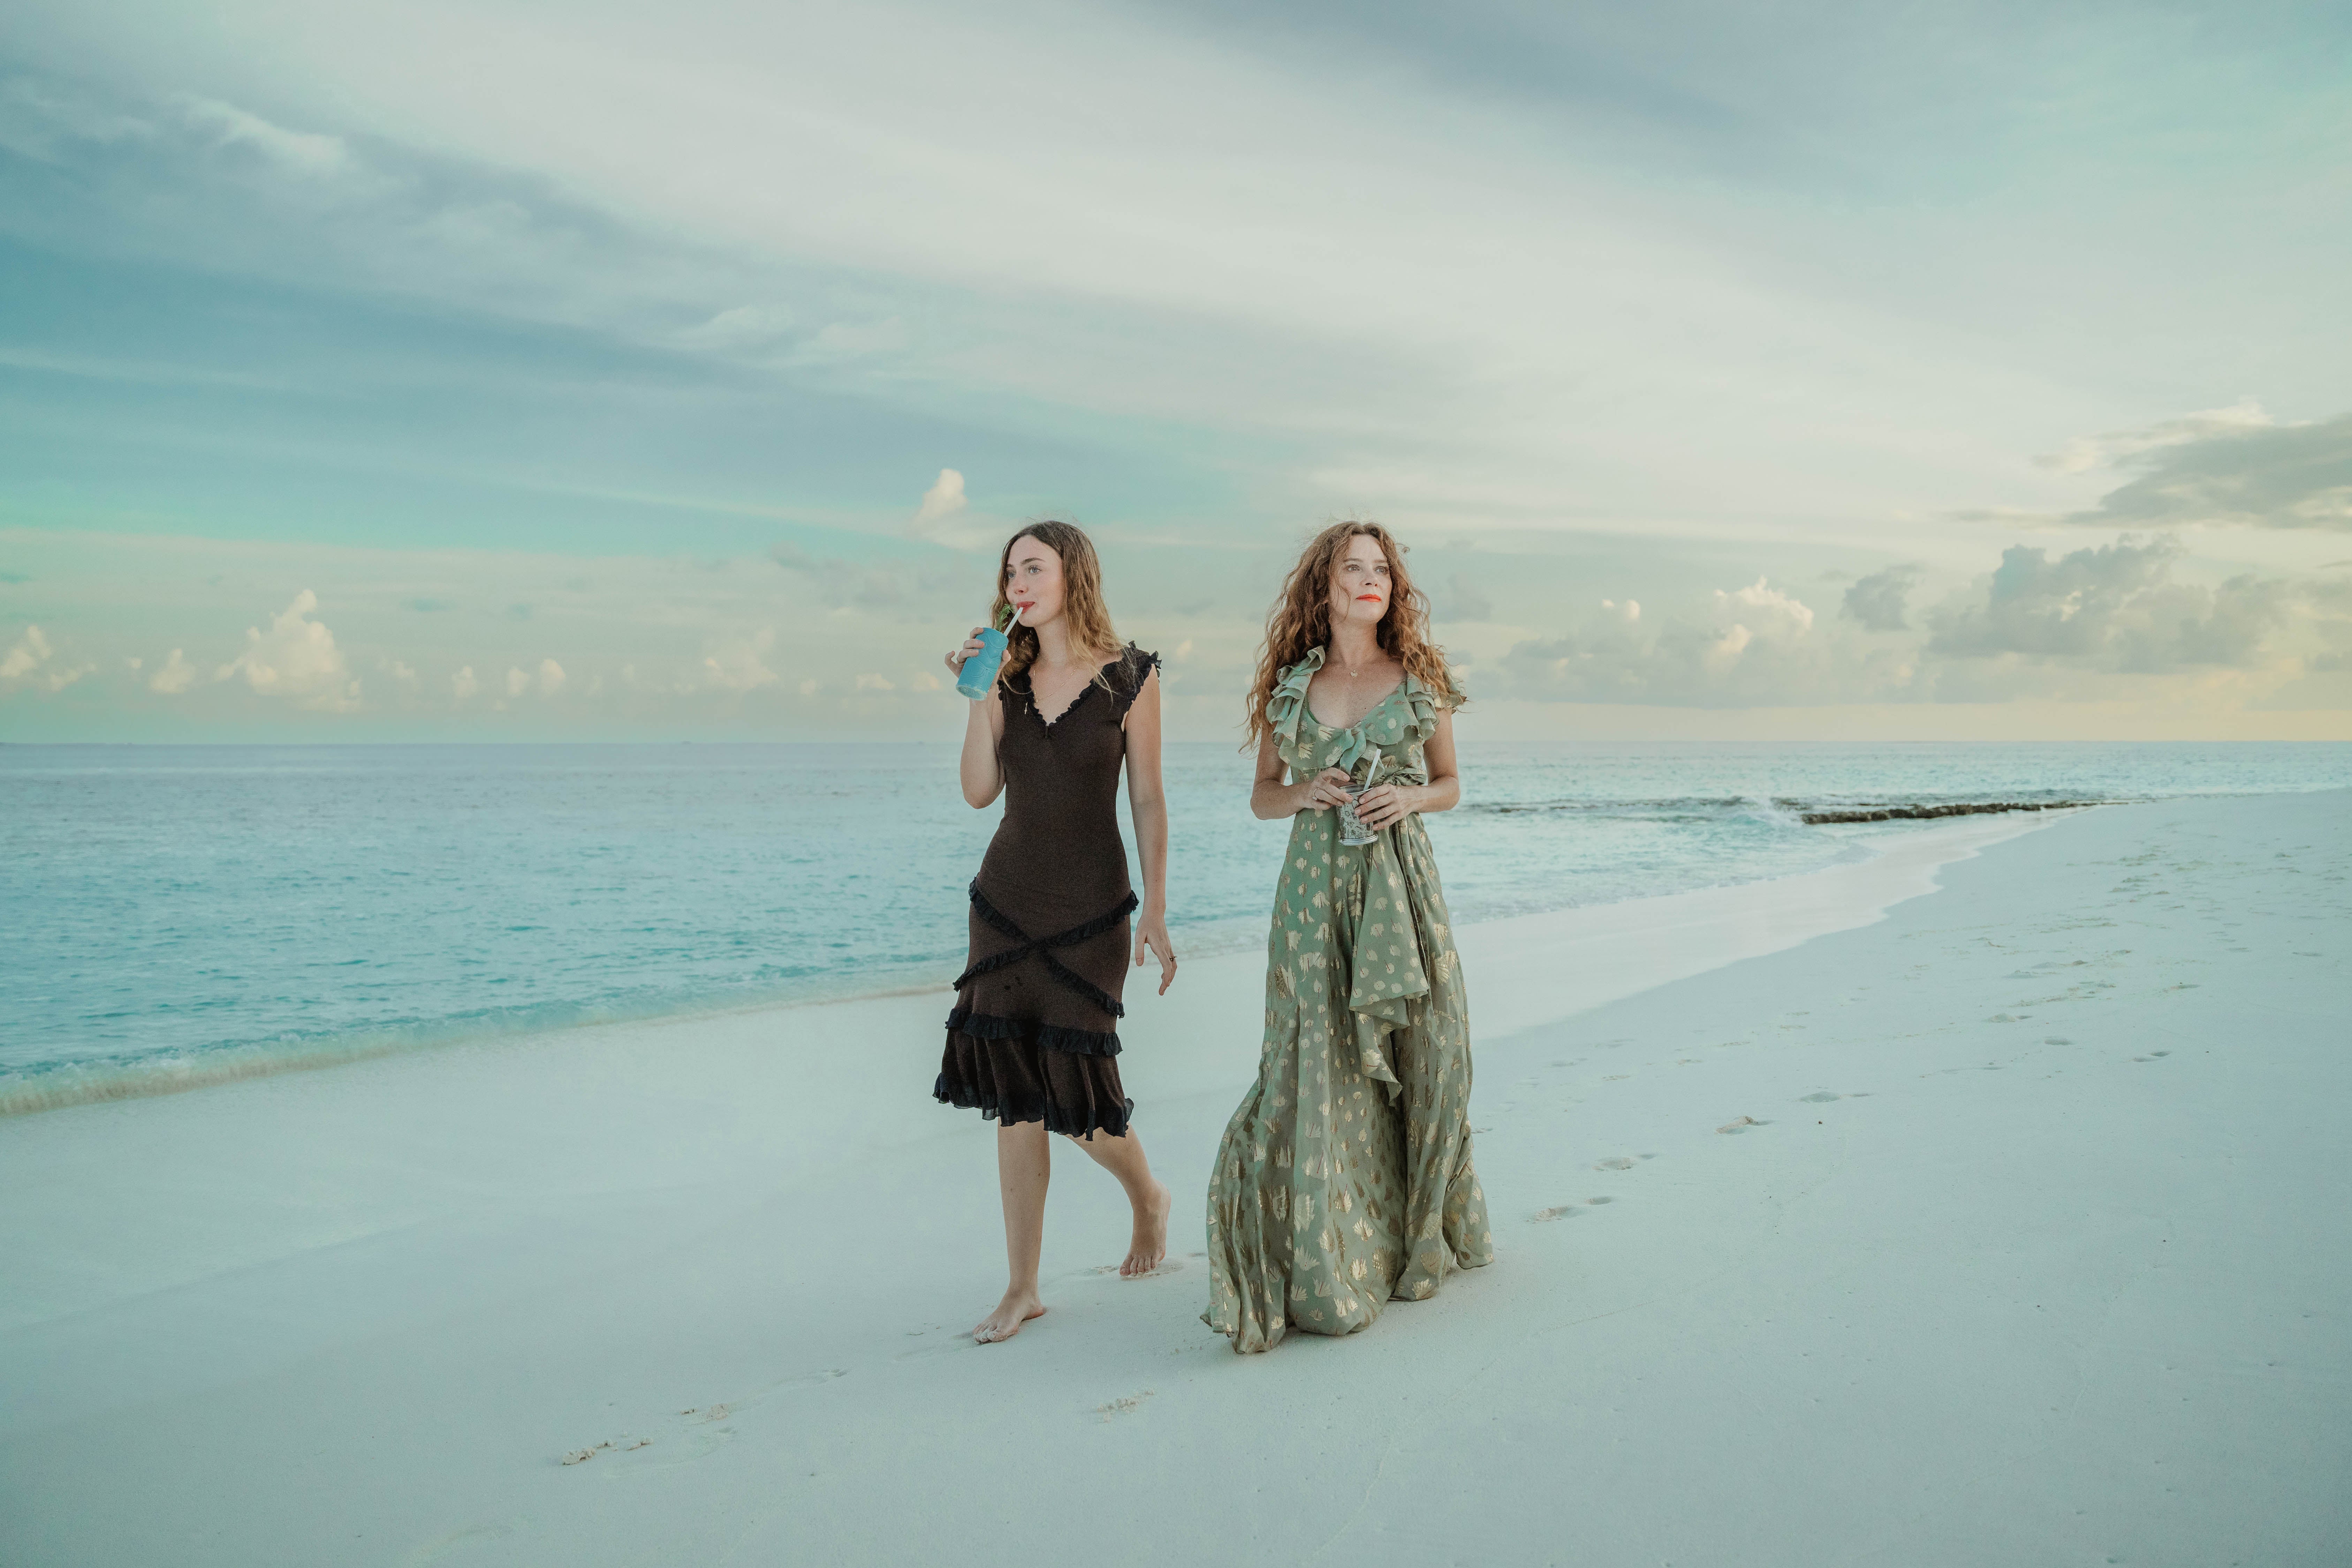 Anna Friel describes the magic of a mother-daughter trip to the Maldives The Independent pic